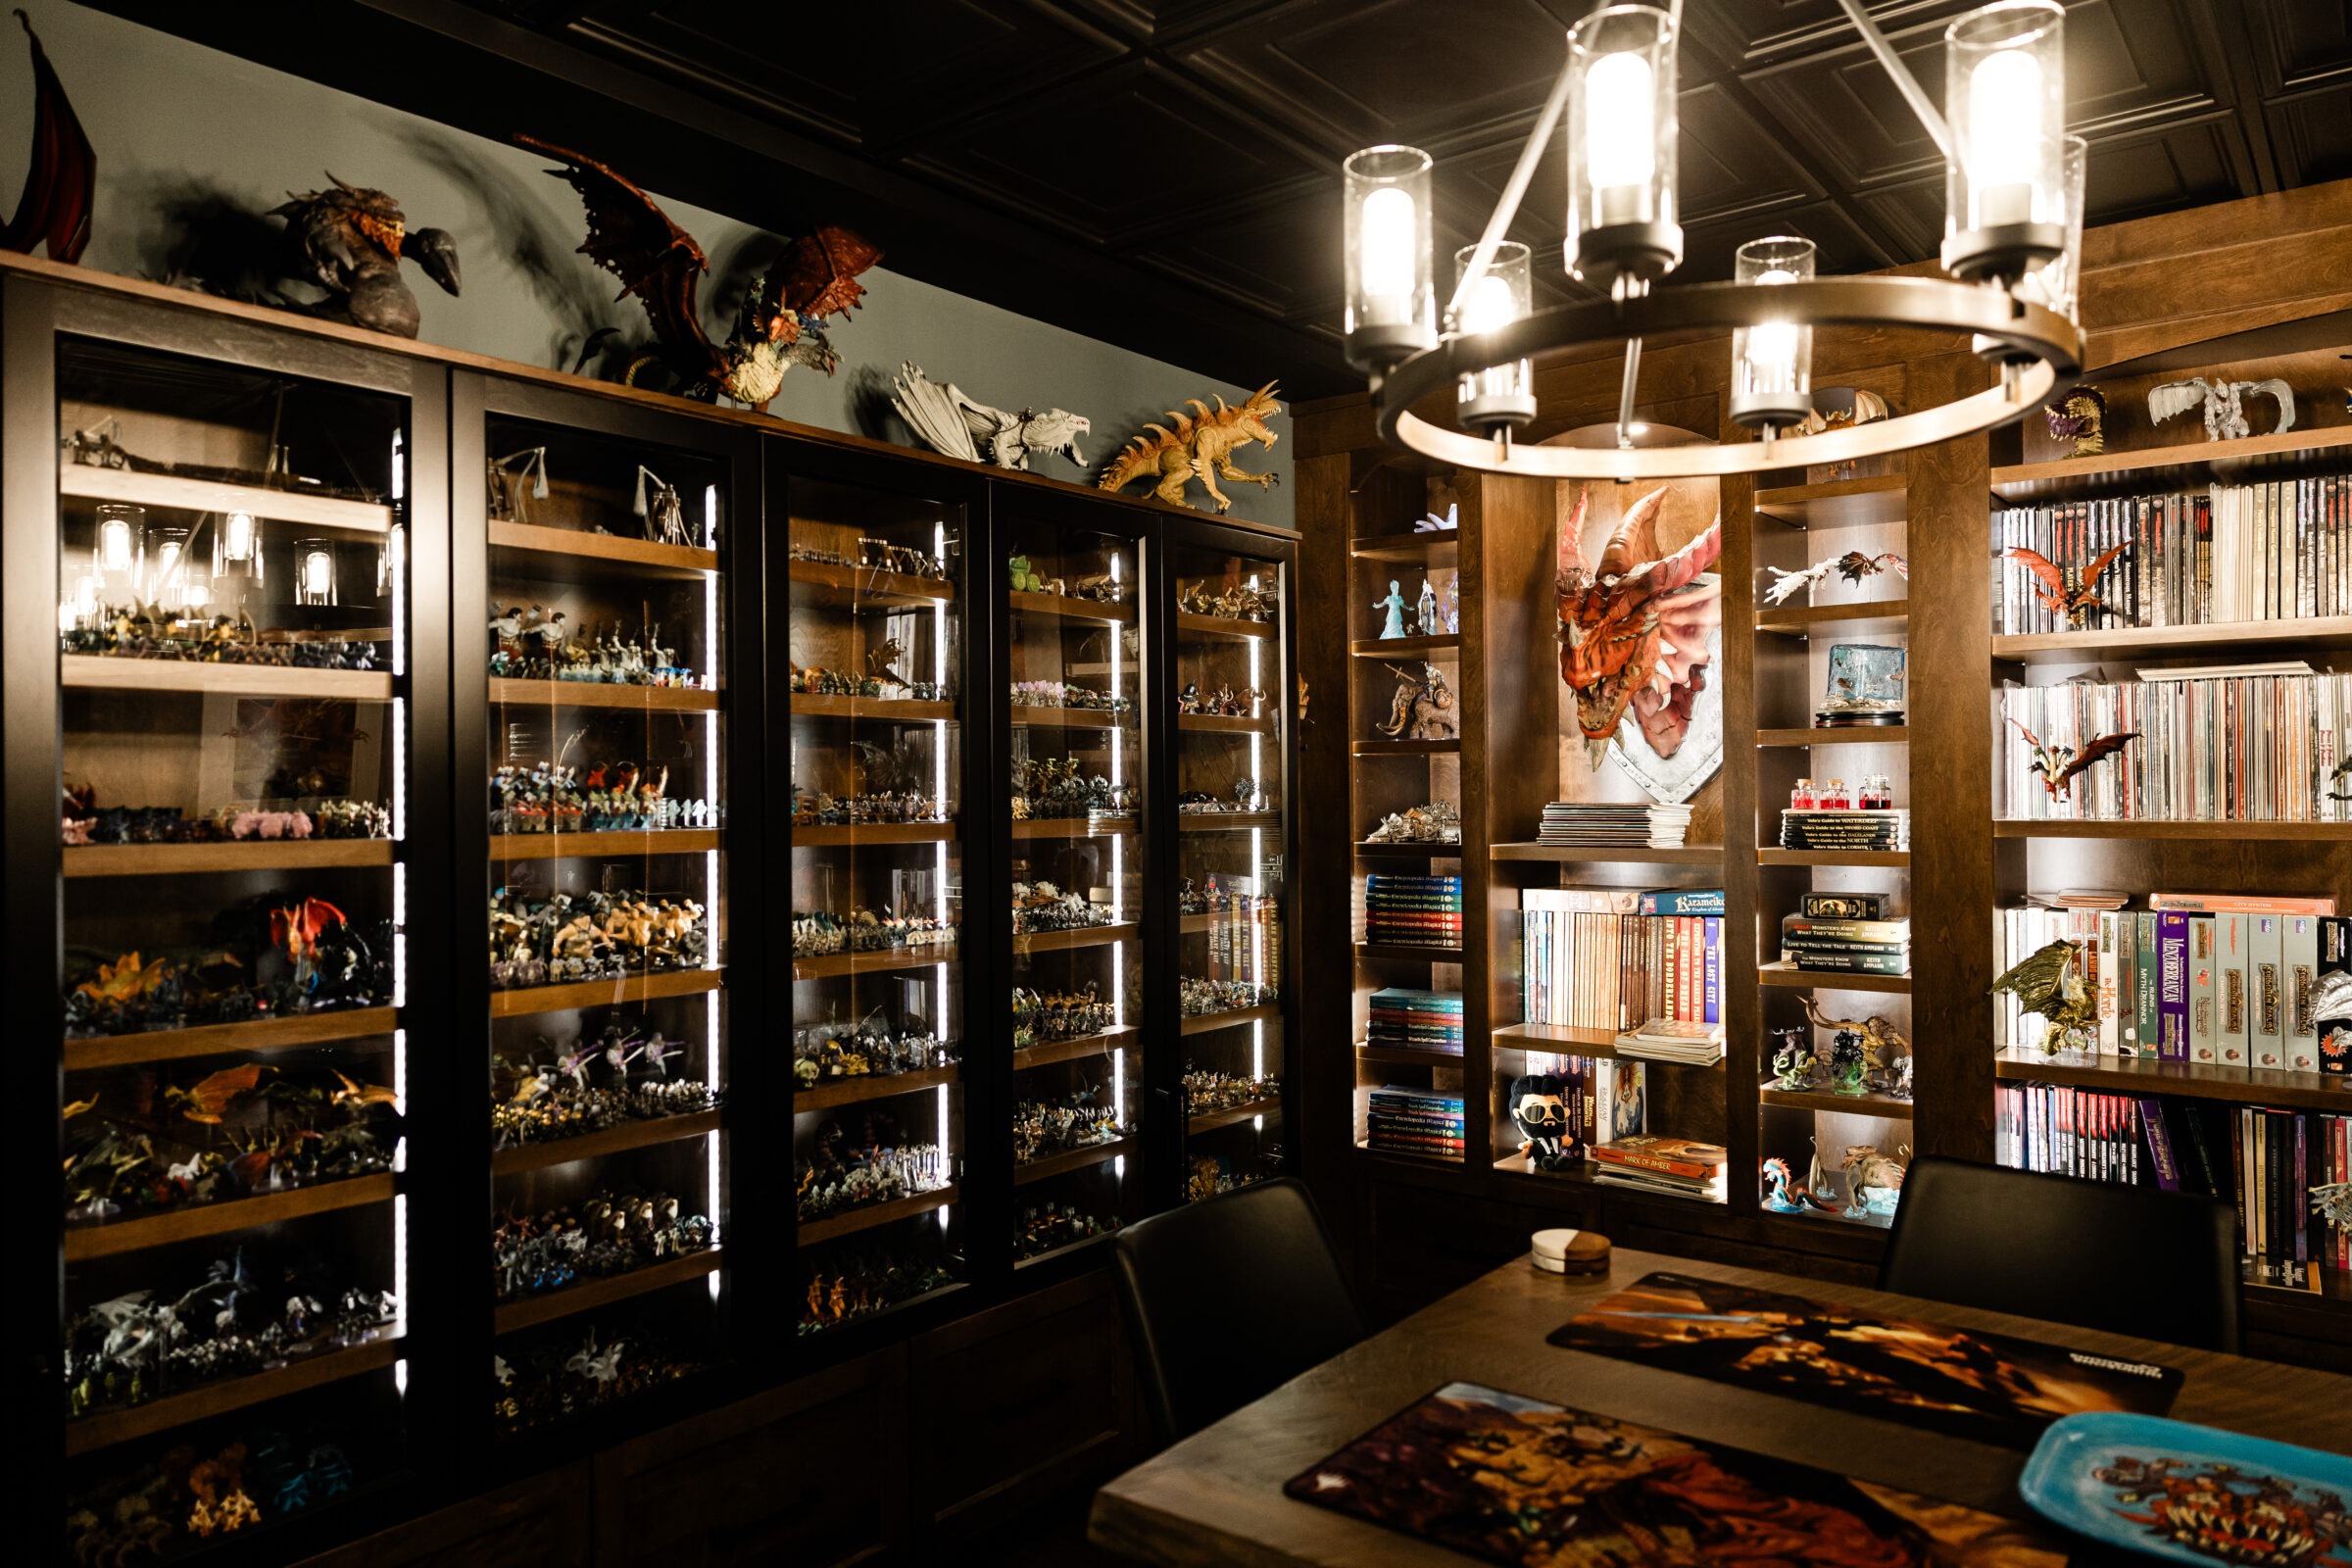 The image shows a warmly lit, cozy room filled with shelves displaying an extensive collection of miniatures, books, and fantasy-themed decorative items.